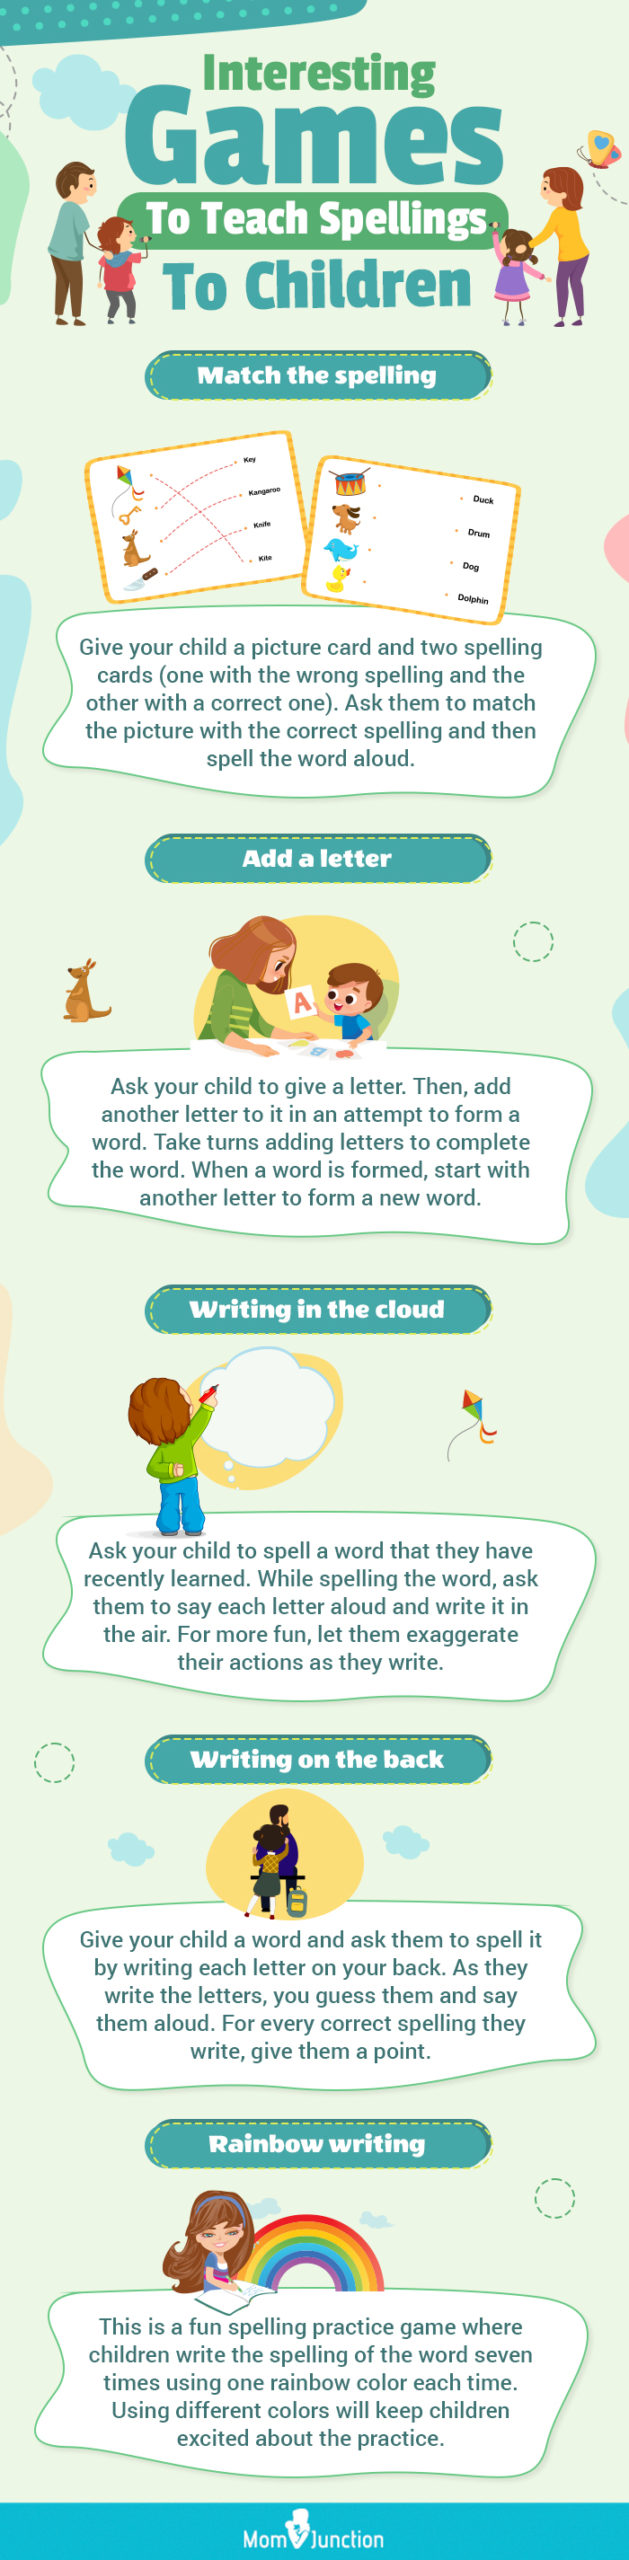 interesting games to teach spellings to children (infographic)